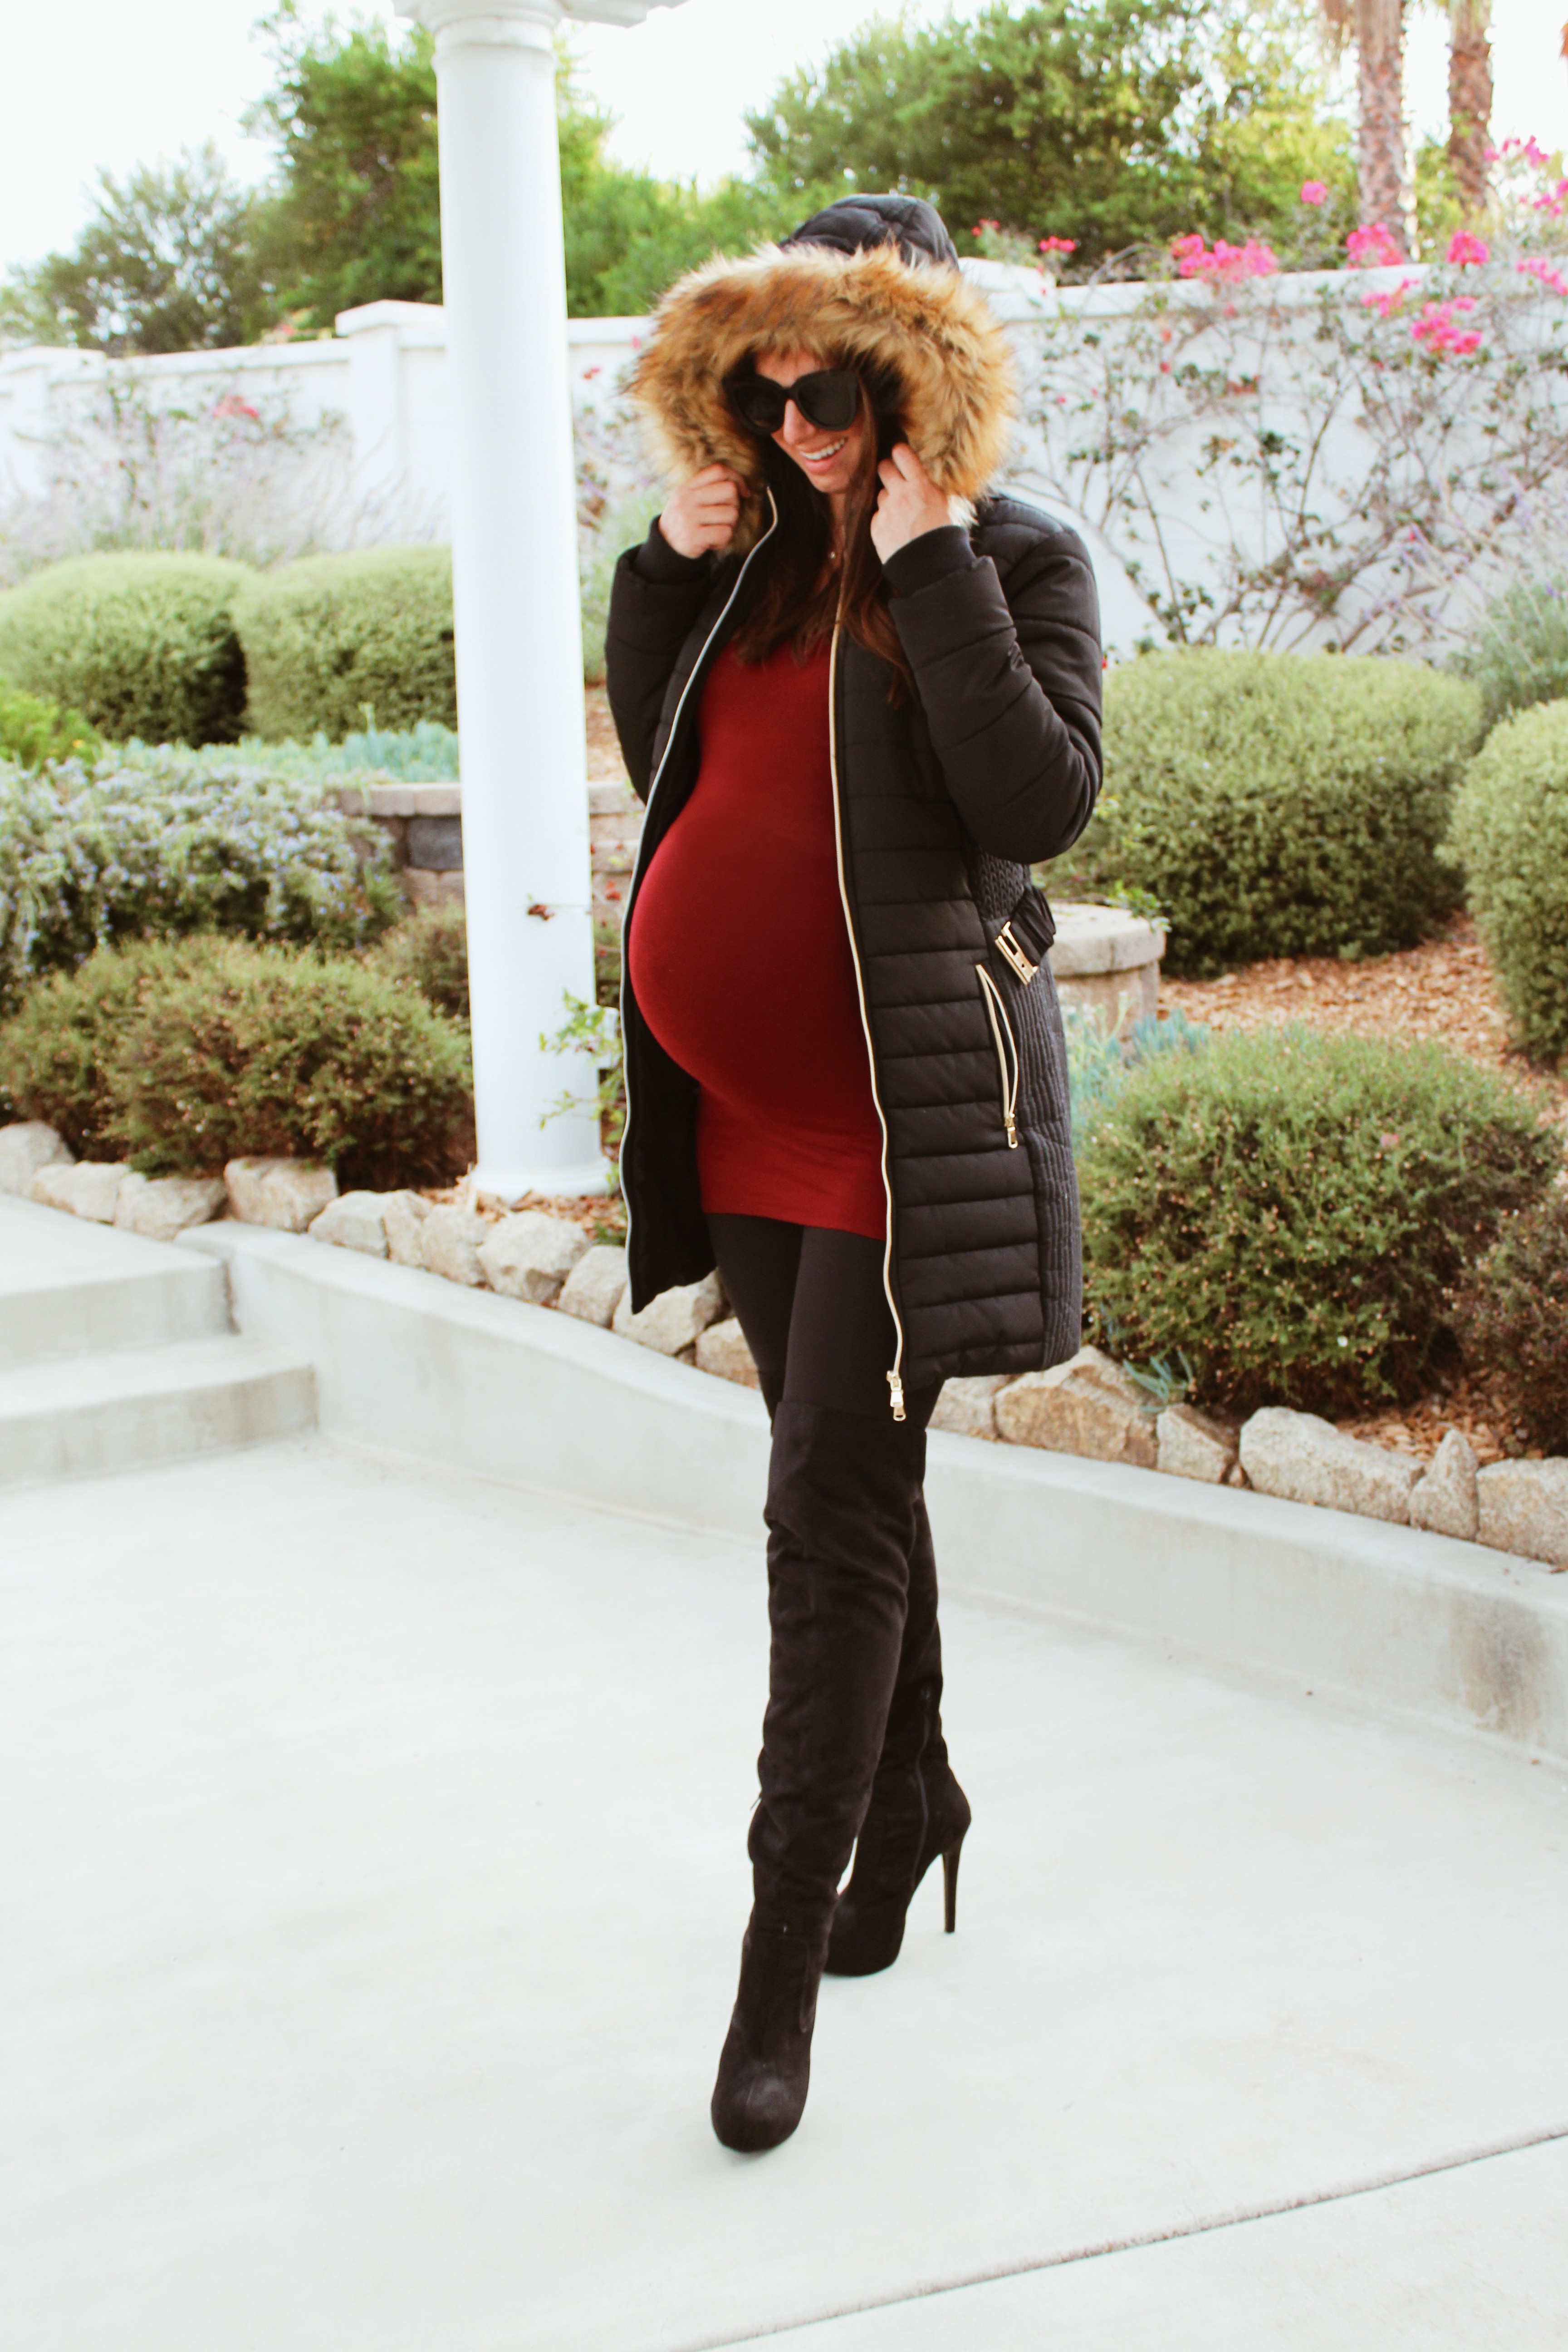 BLACK FASHION  Winter maternity outfits, Winter outfits cold, London  instagram